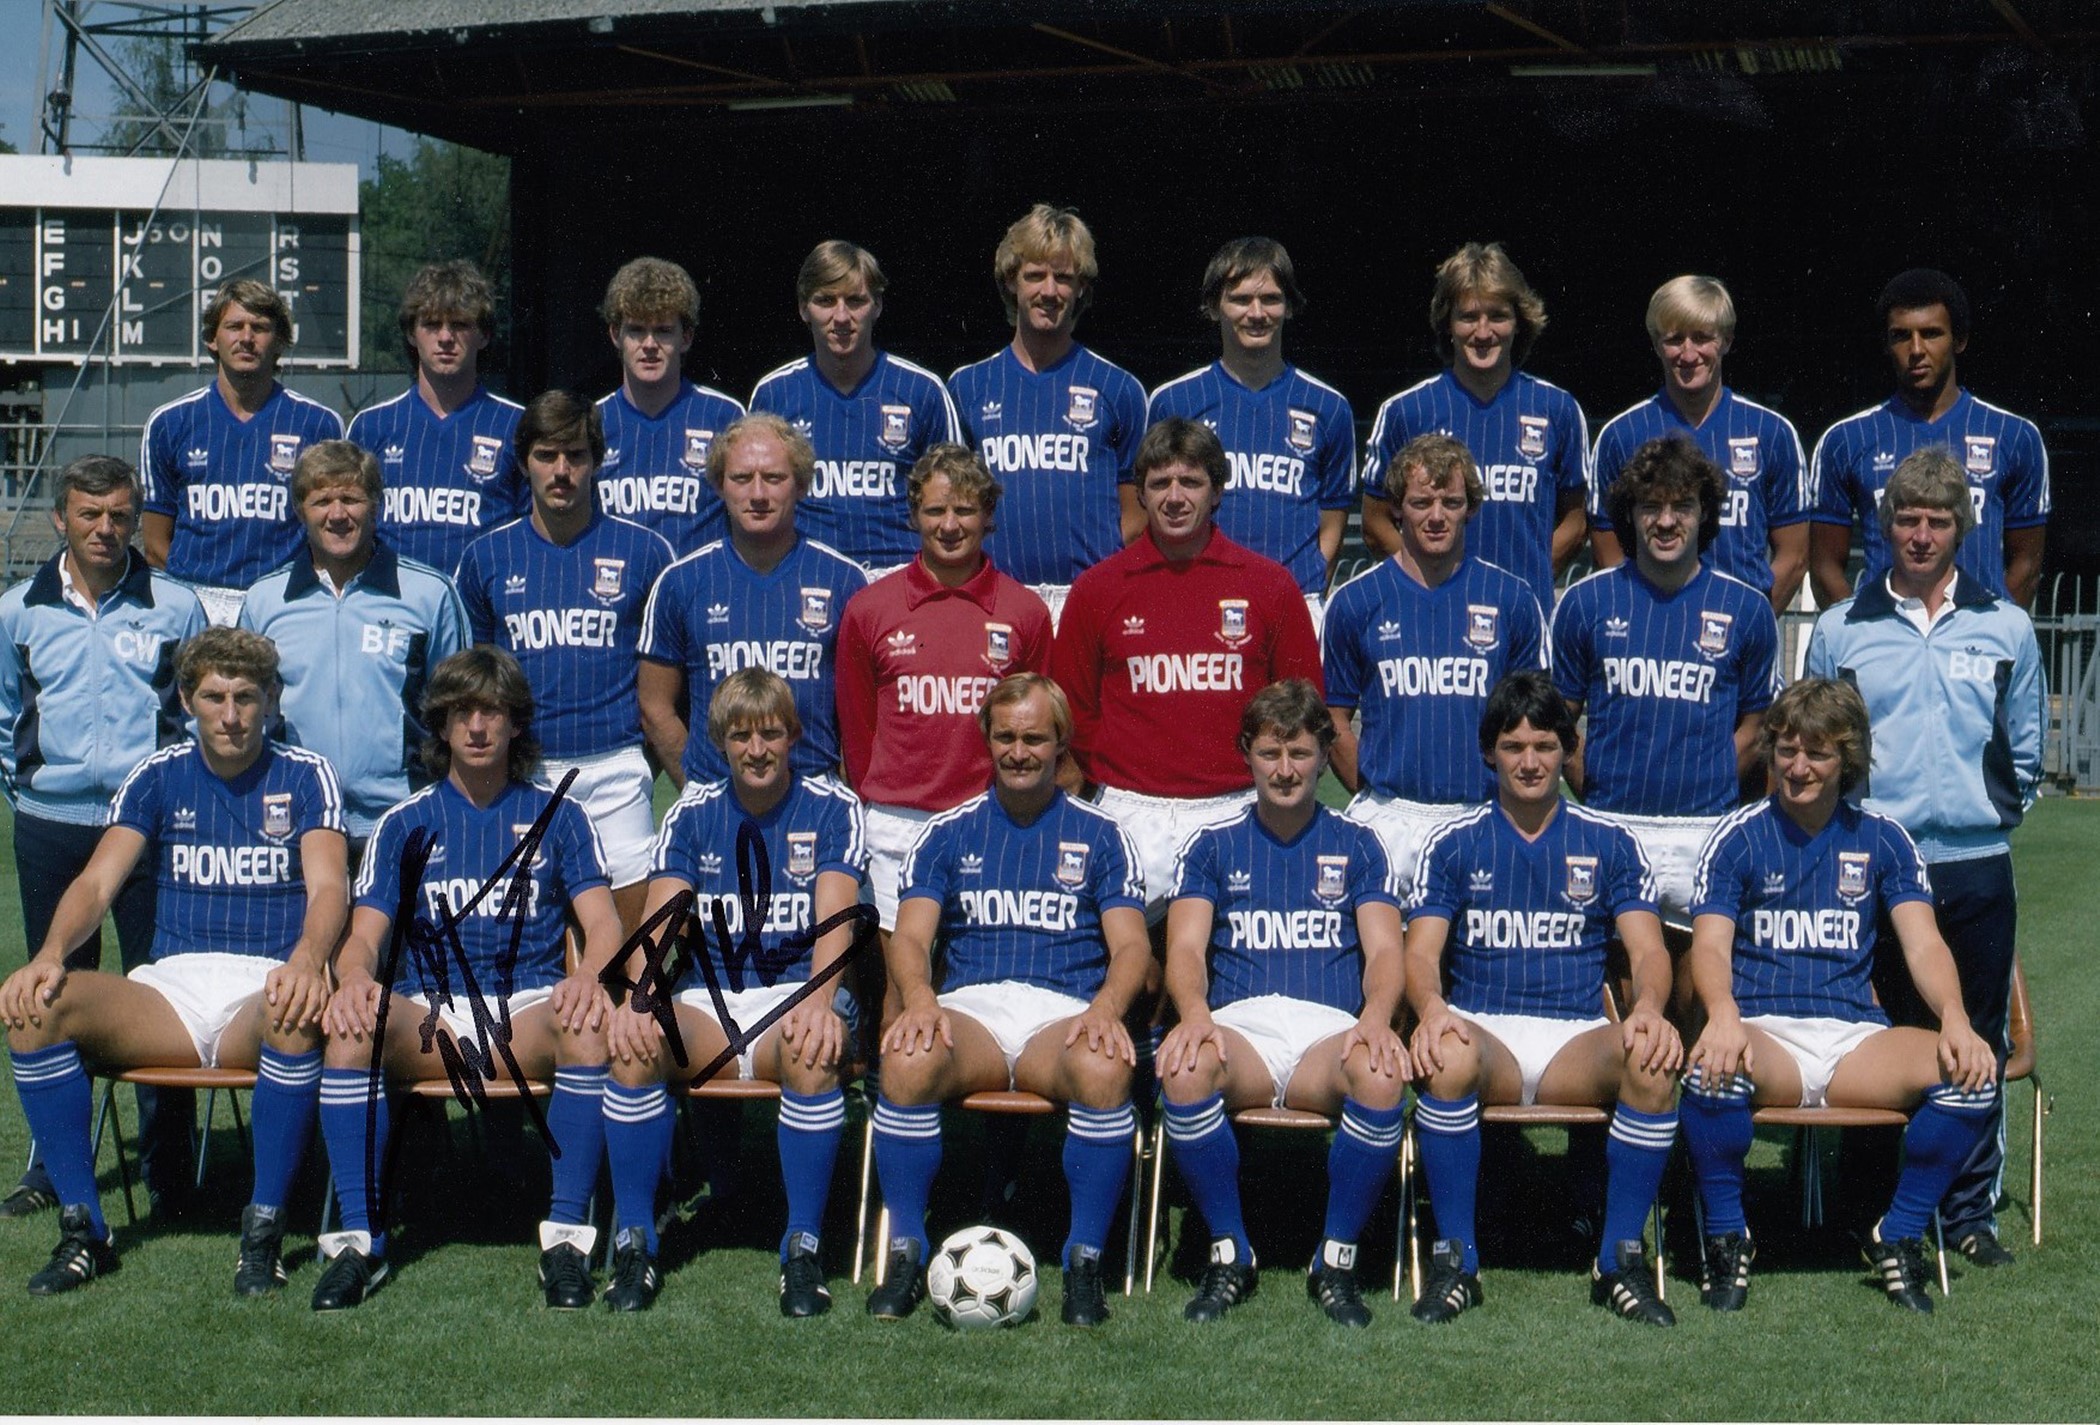 Autographed Ipswich Town 12 X 8 Photo: Col, Depicting Ipswich Town's Squad Of Players And Coaching